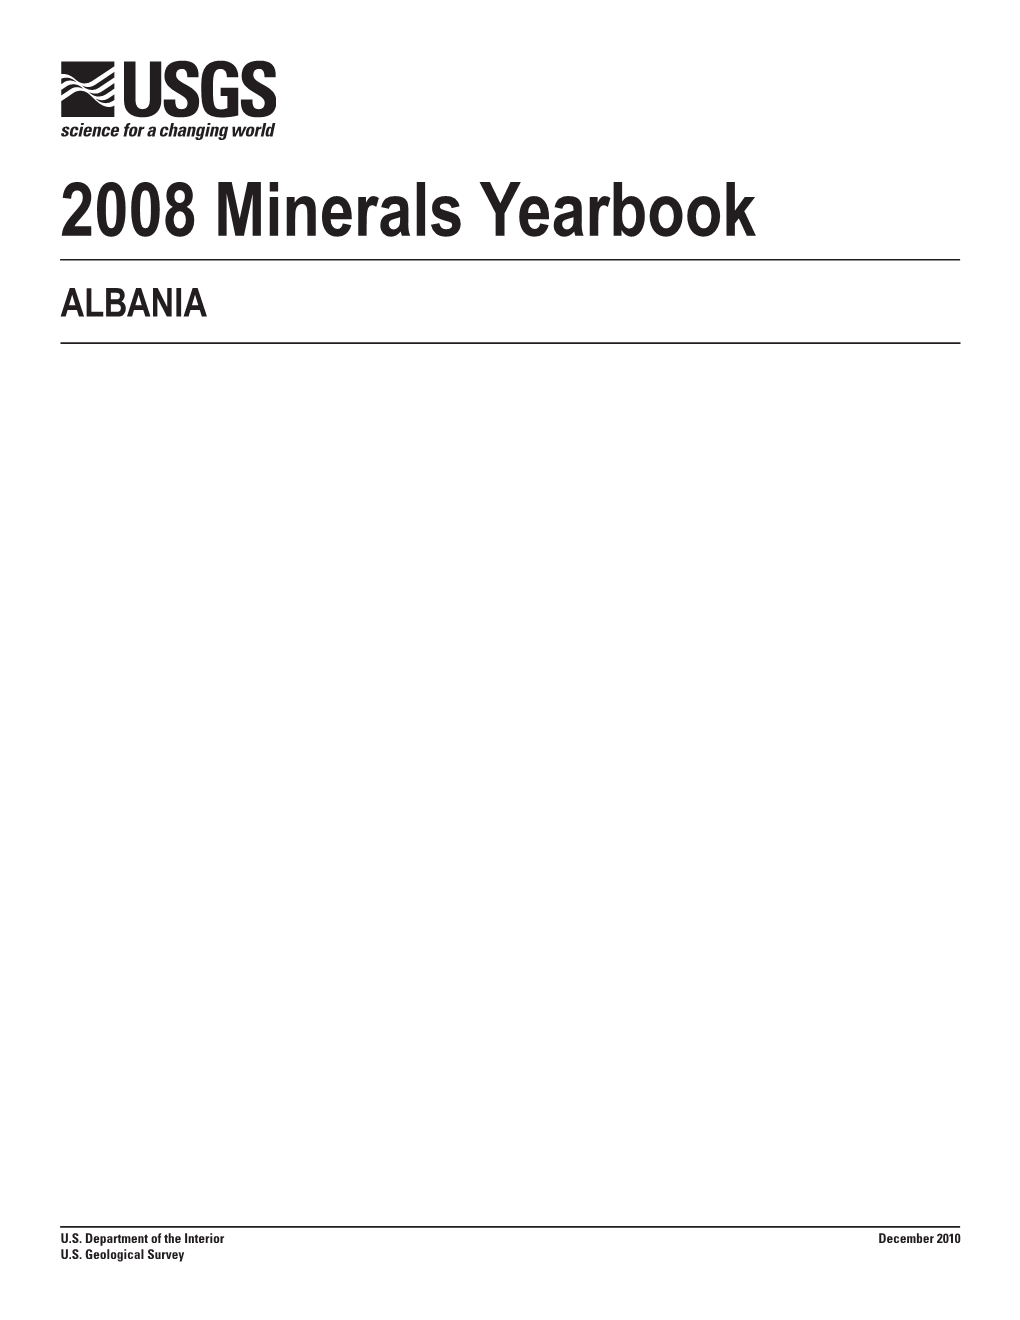 The Mineral Industry of Albania in 2008